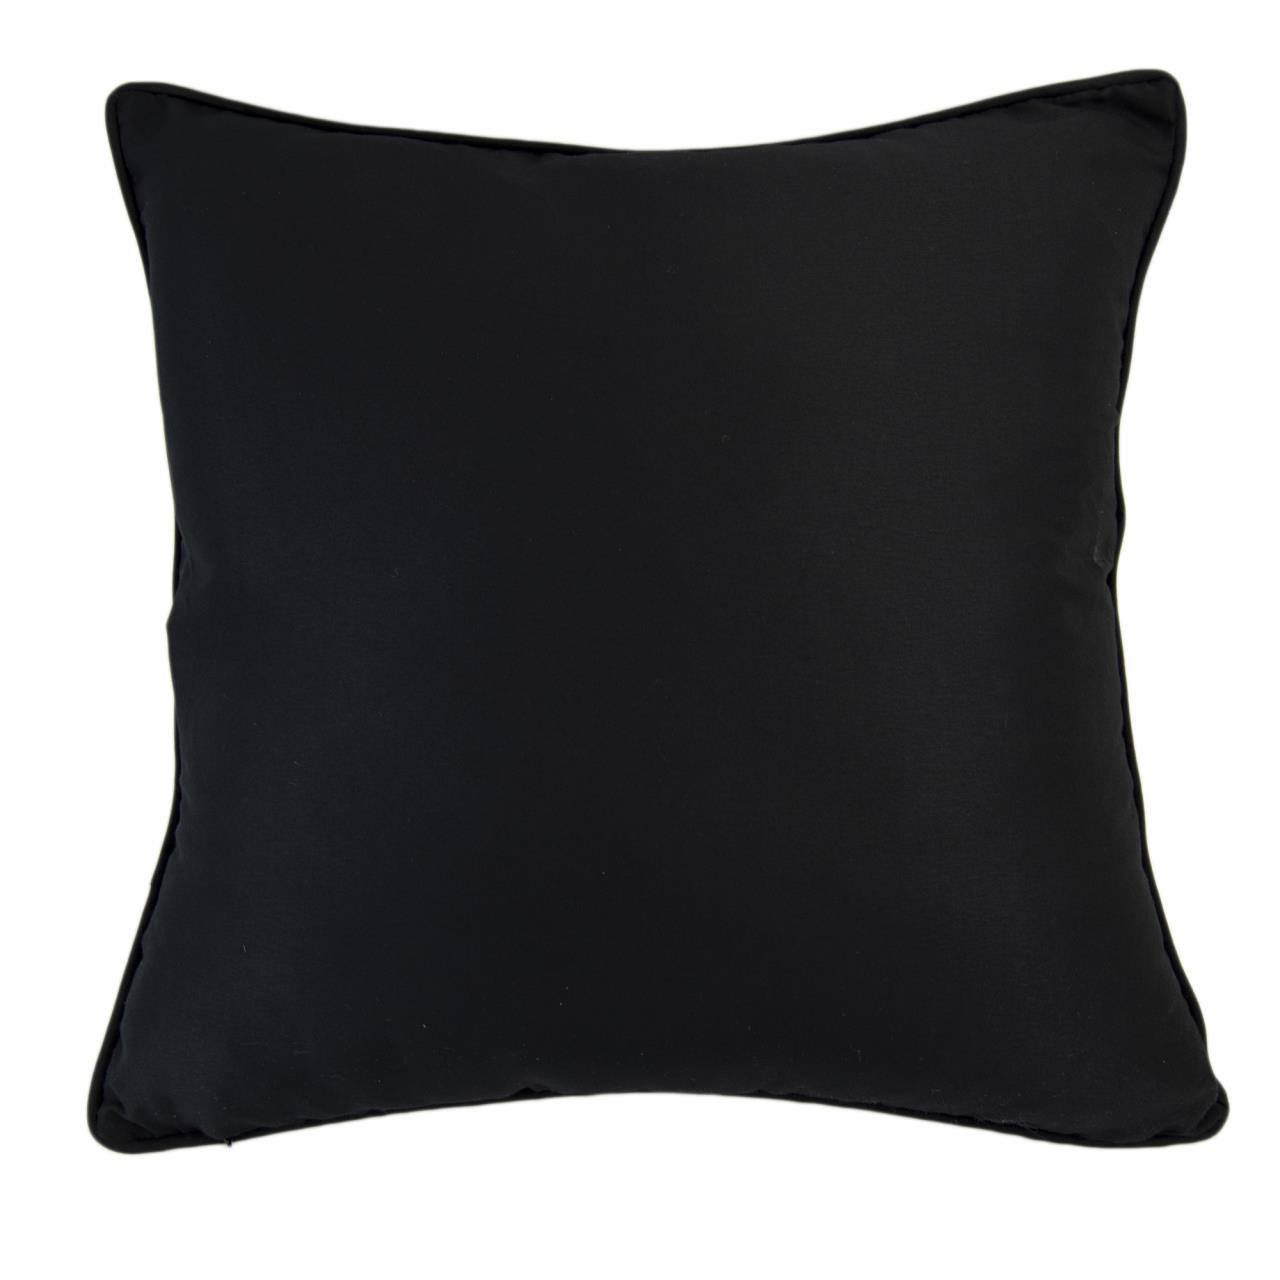 Forest Grove Good Time Pillow - 754069204625